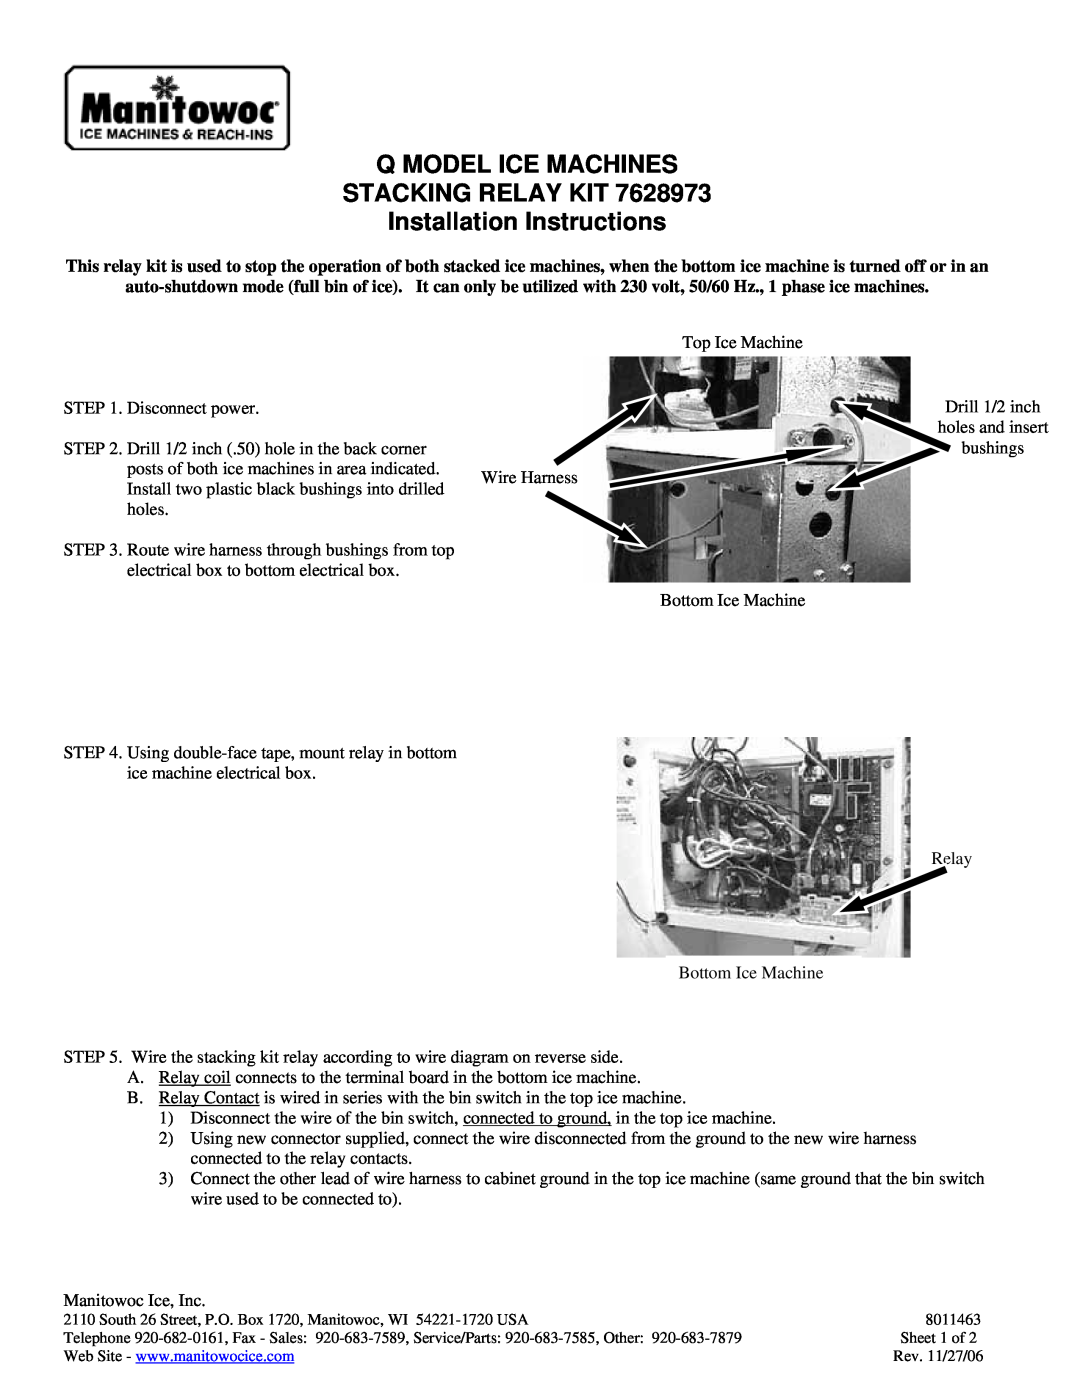 Manitowoc Ice 7628973 installation instructions Q Model Ice Machines Stacking Relay Kit, Installation Instructions 